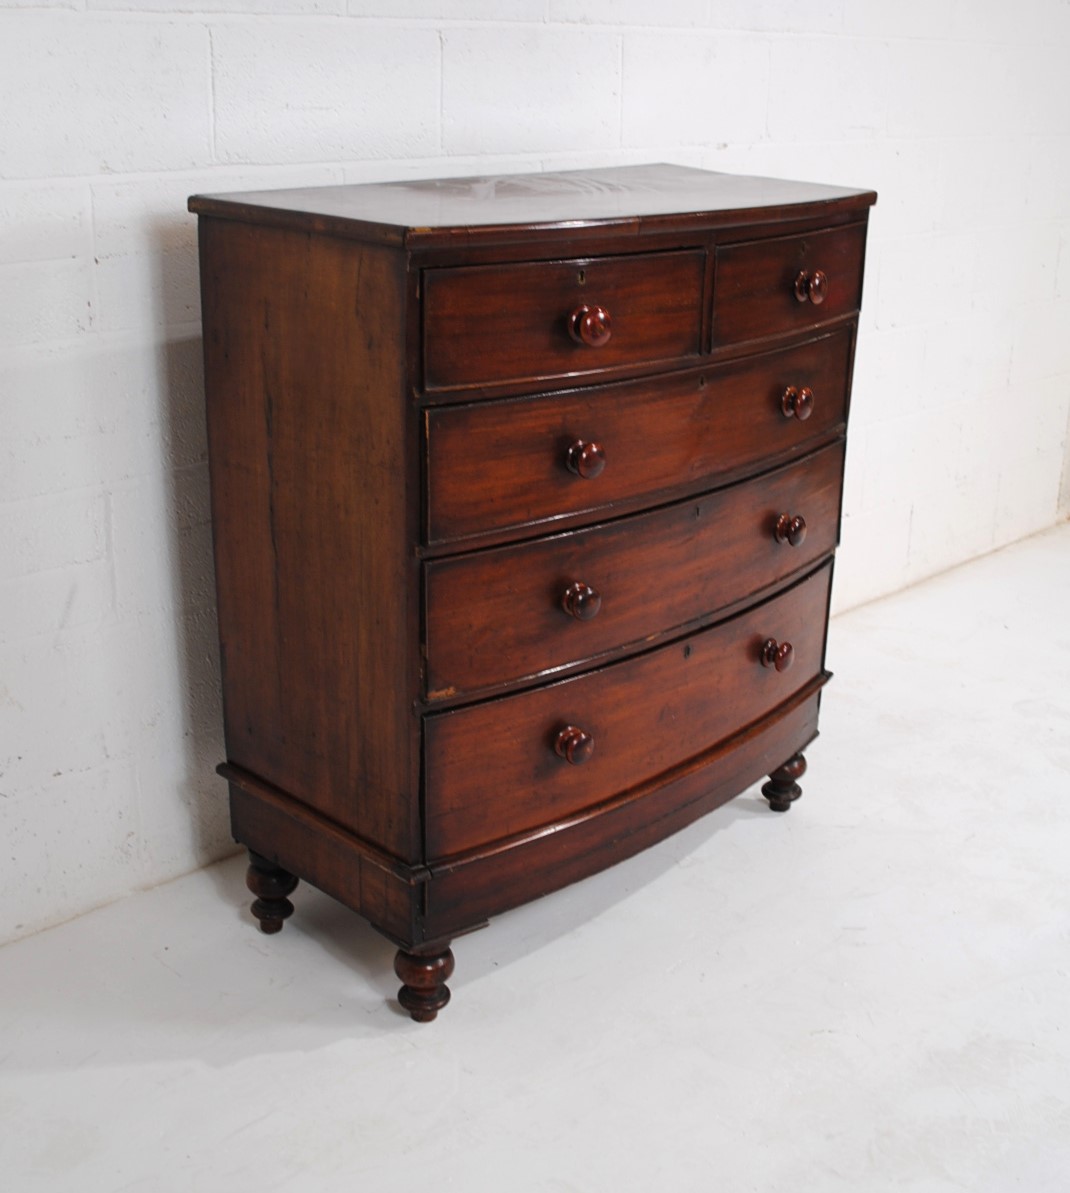 A Victorian mahogany bow-fronted chest of five drawers, raised on turned legs - one leg loose but - Image 3 of 8